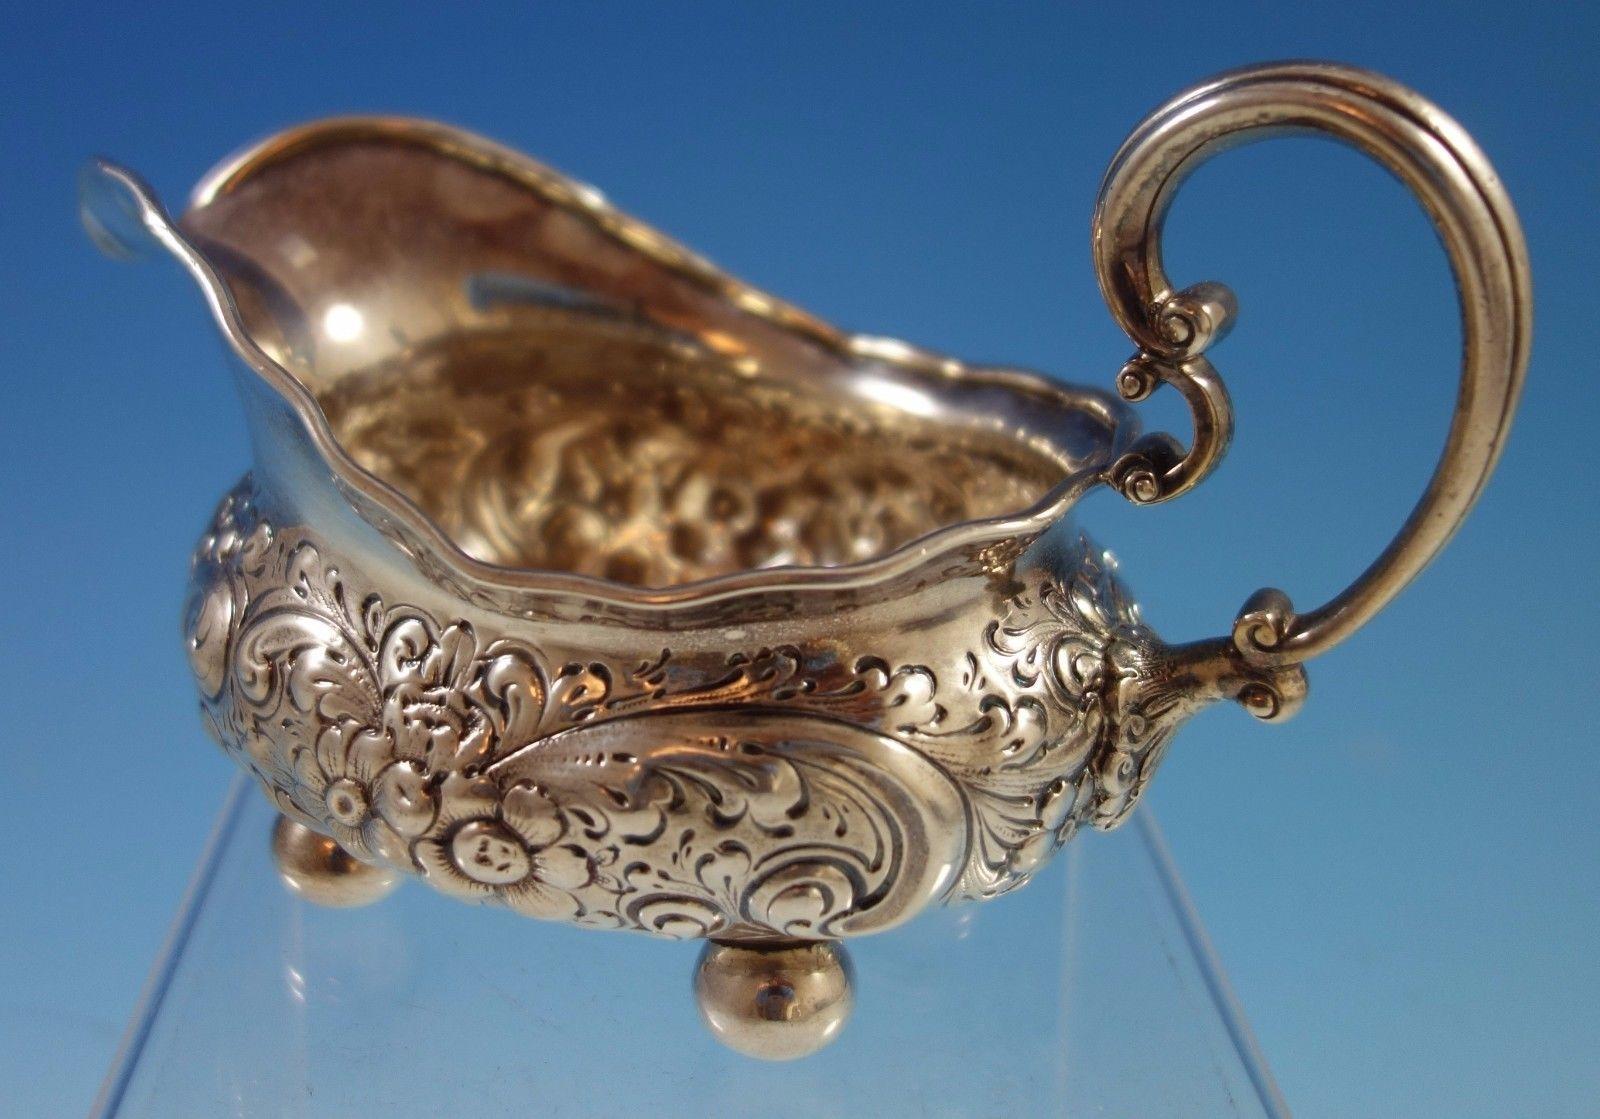 Lovely sterling silver gravy boat marked #502 beautifully repoussed with flowers and scrollwork. Likely made by Dominick & Haff (unmarked). This piece weighs 8.55 troy ounces and measures 4